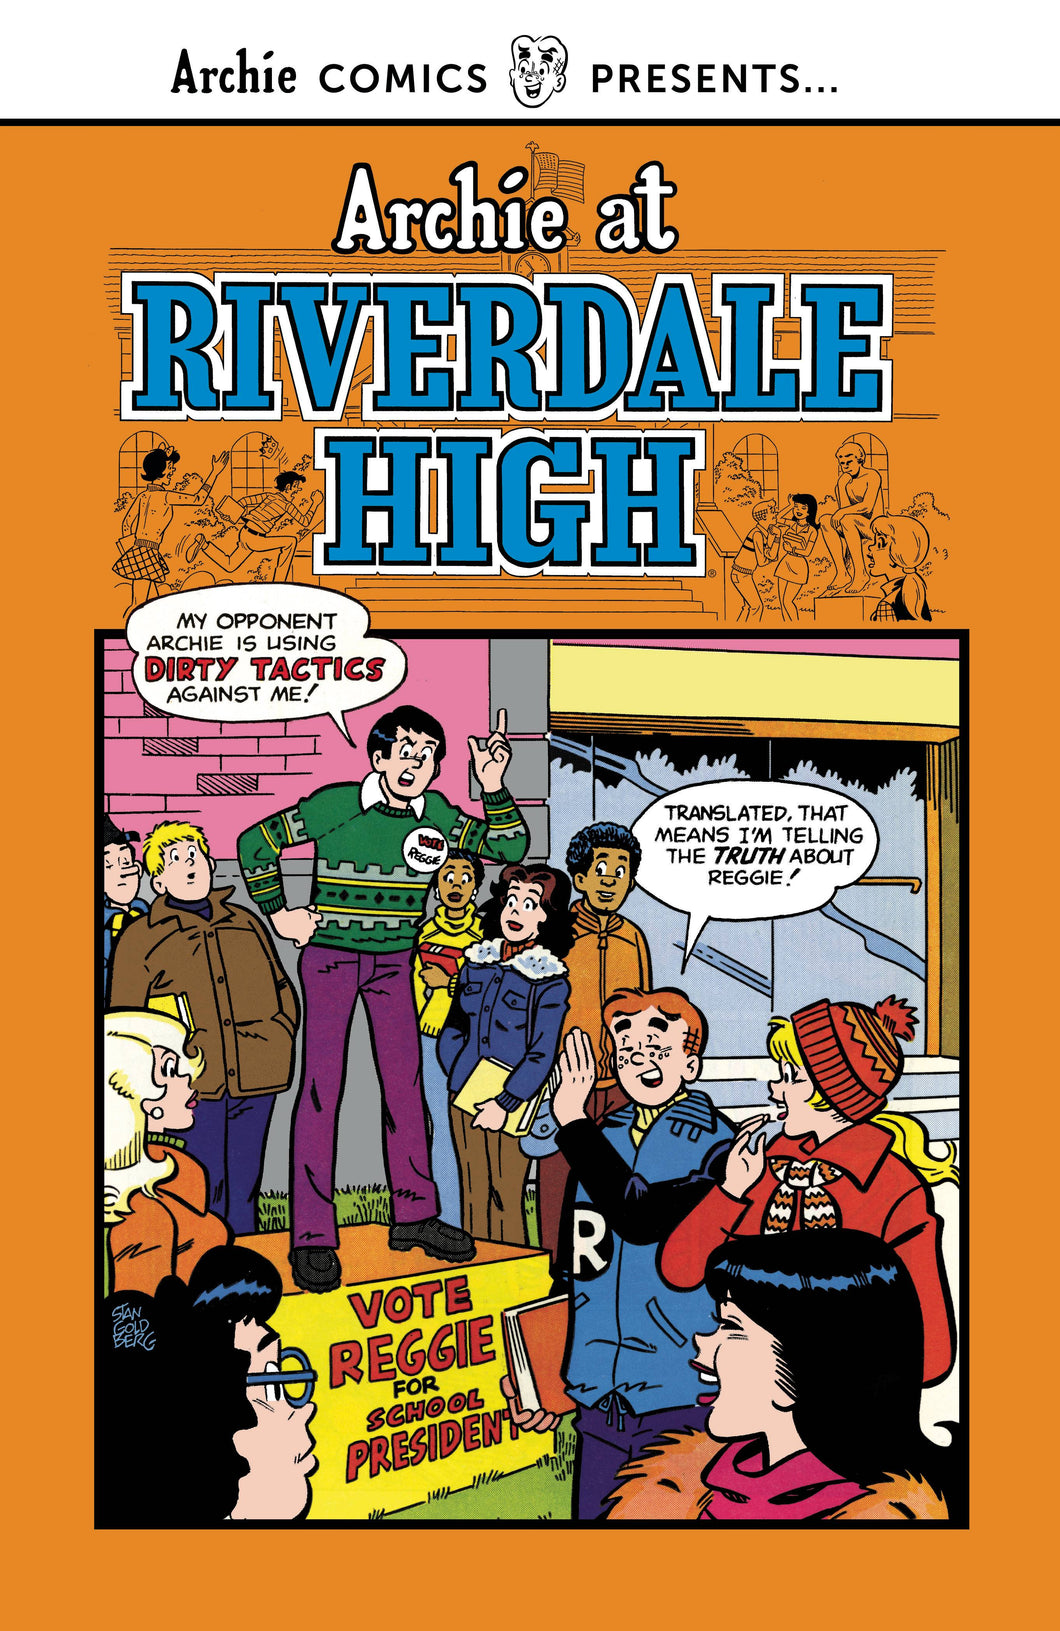 Archie at Riverdale High:S3